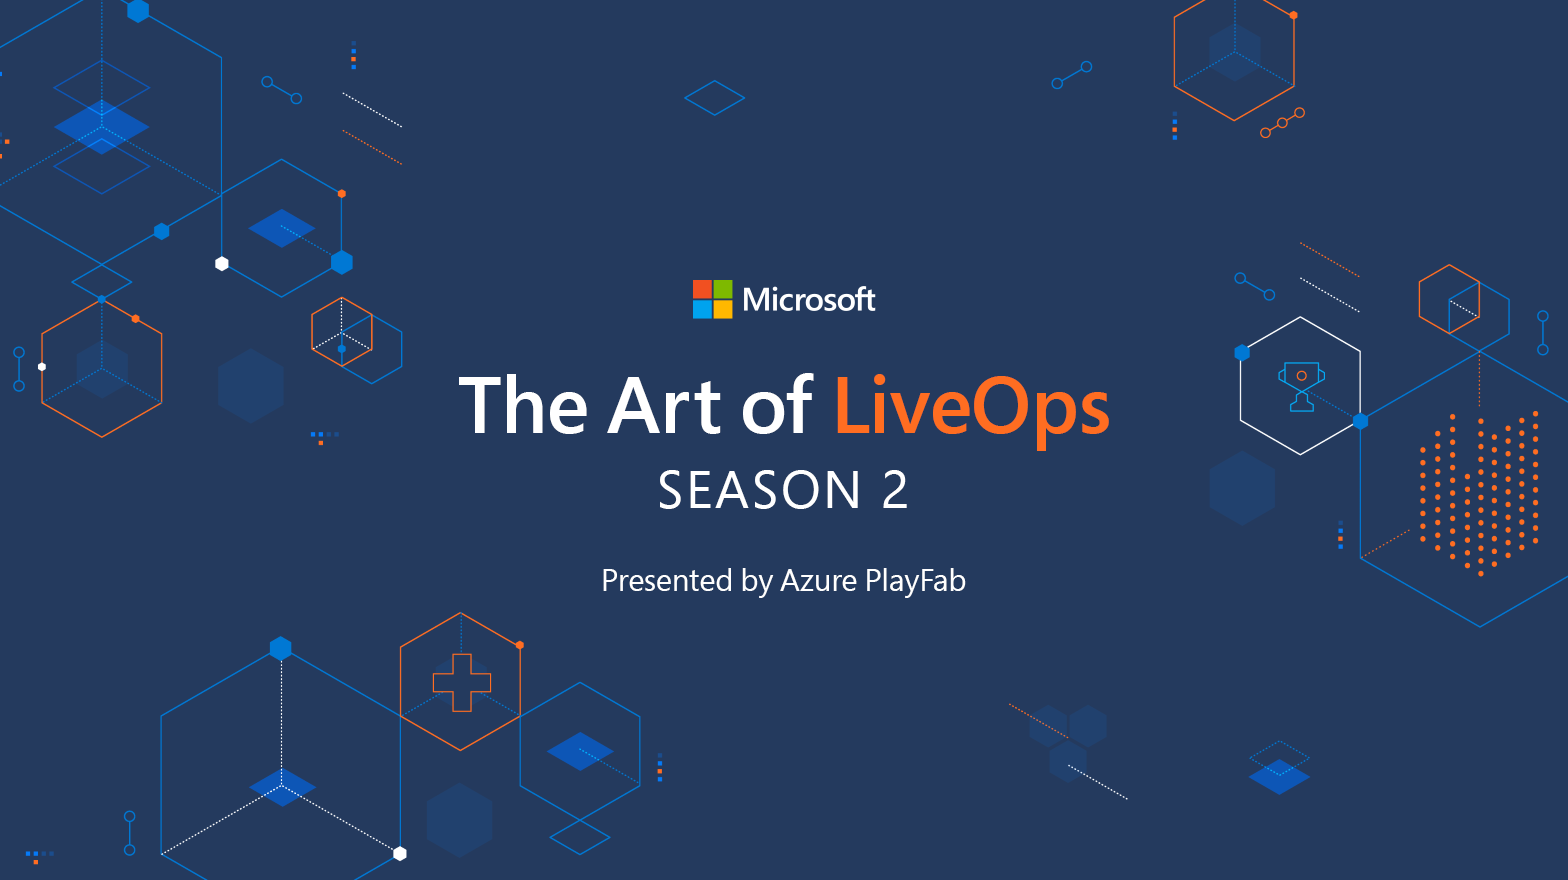 The Art of LiveOps Season 2 Presented by Azure PlayFab